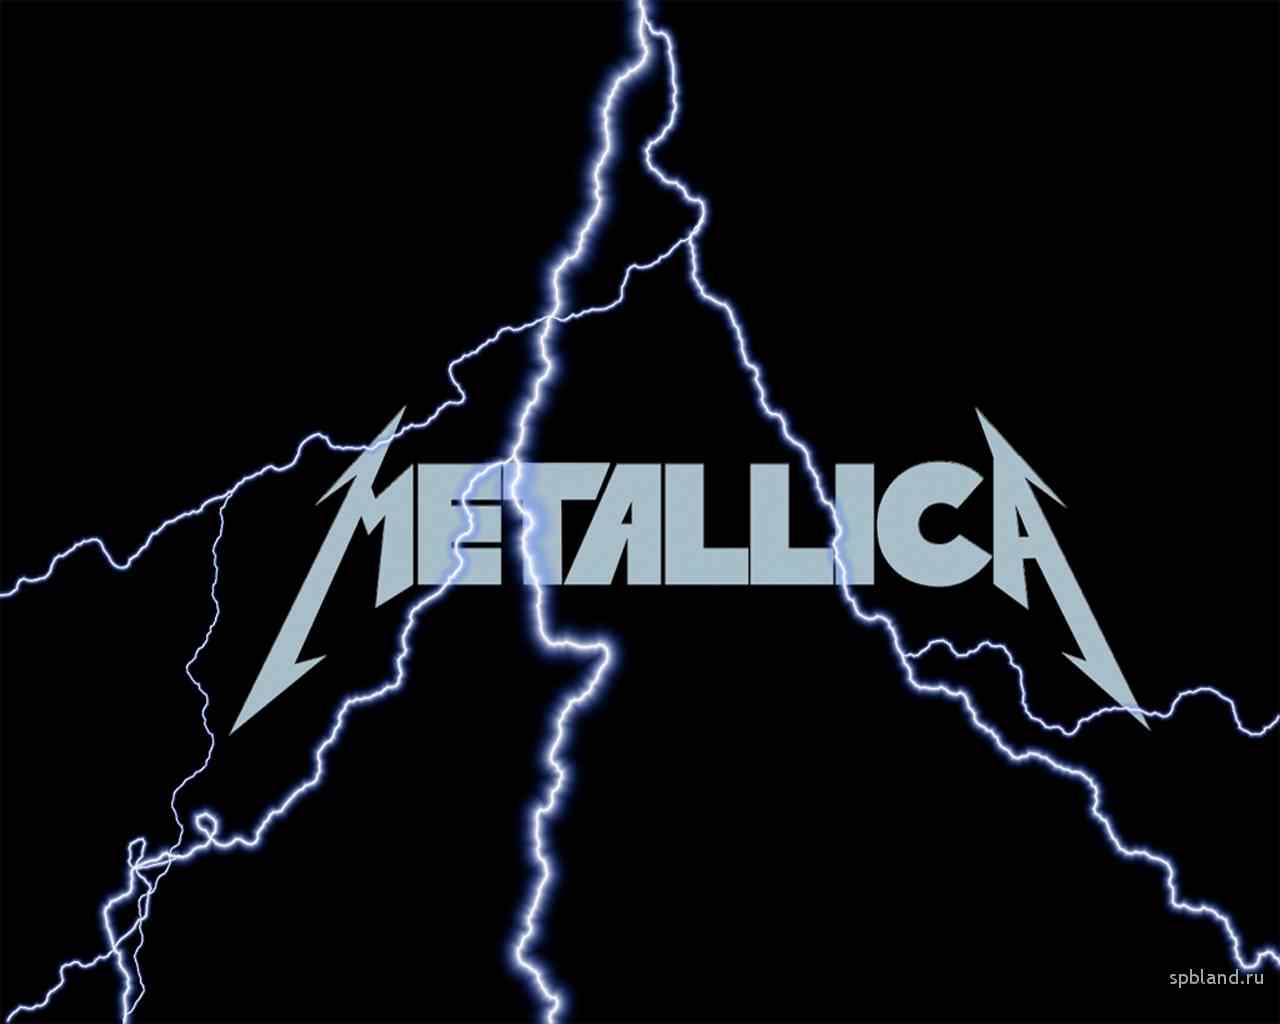 Metallica Wallpaper and Picture Items